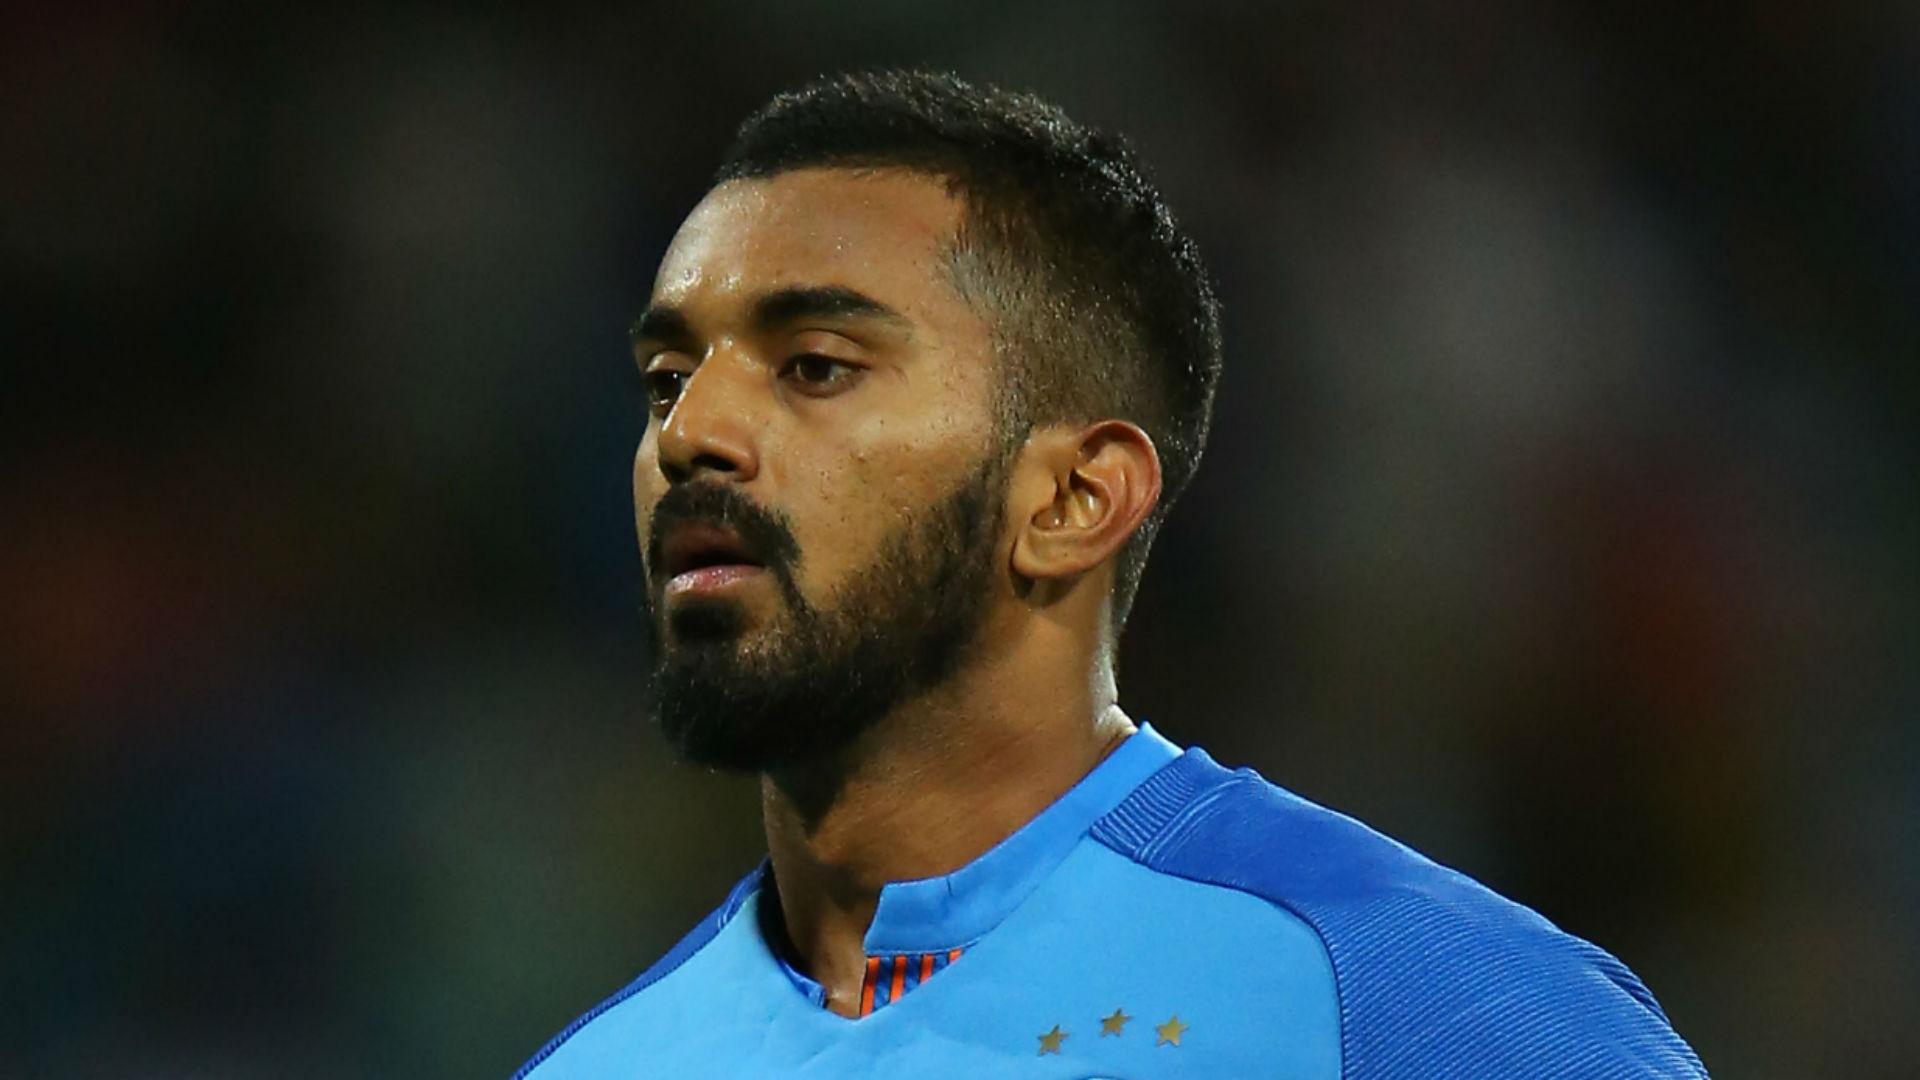 KL Rahul: A Rising Star in Indian Cricket